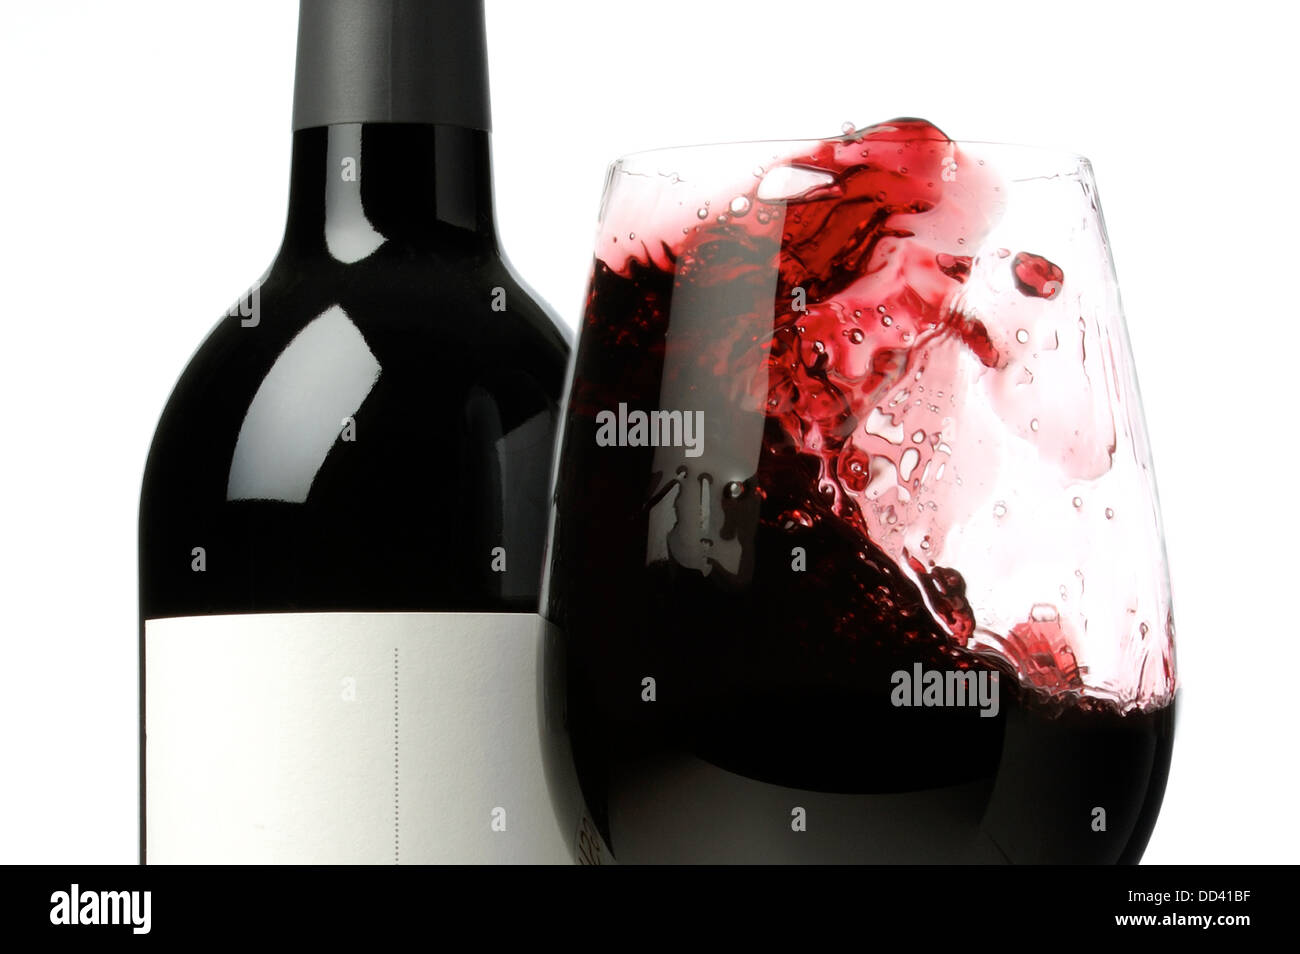 A excited glass of red wine next to a bottle of red wine. Stock Photo